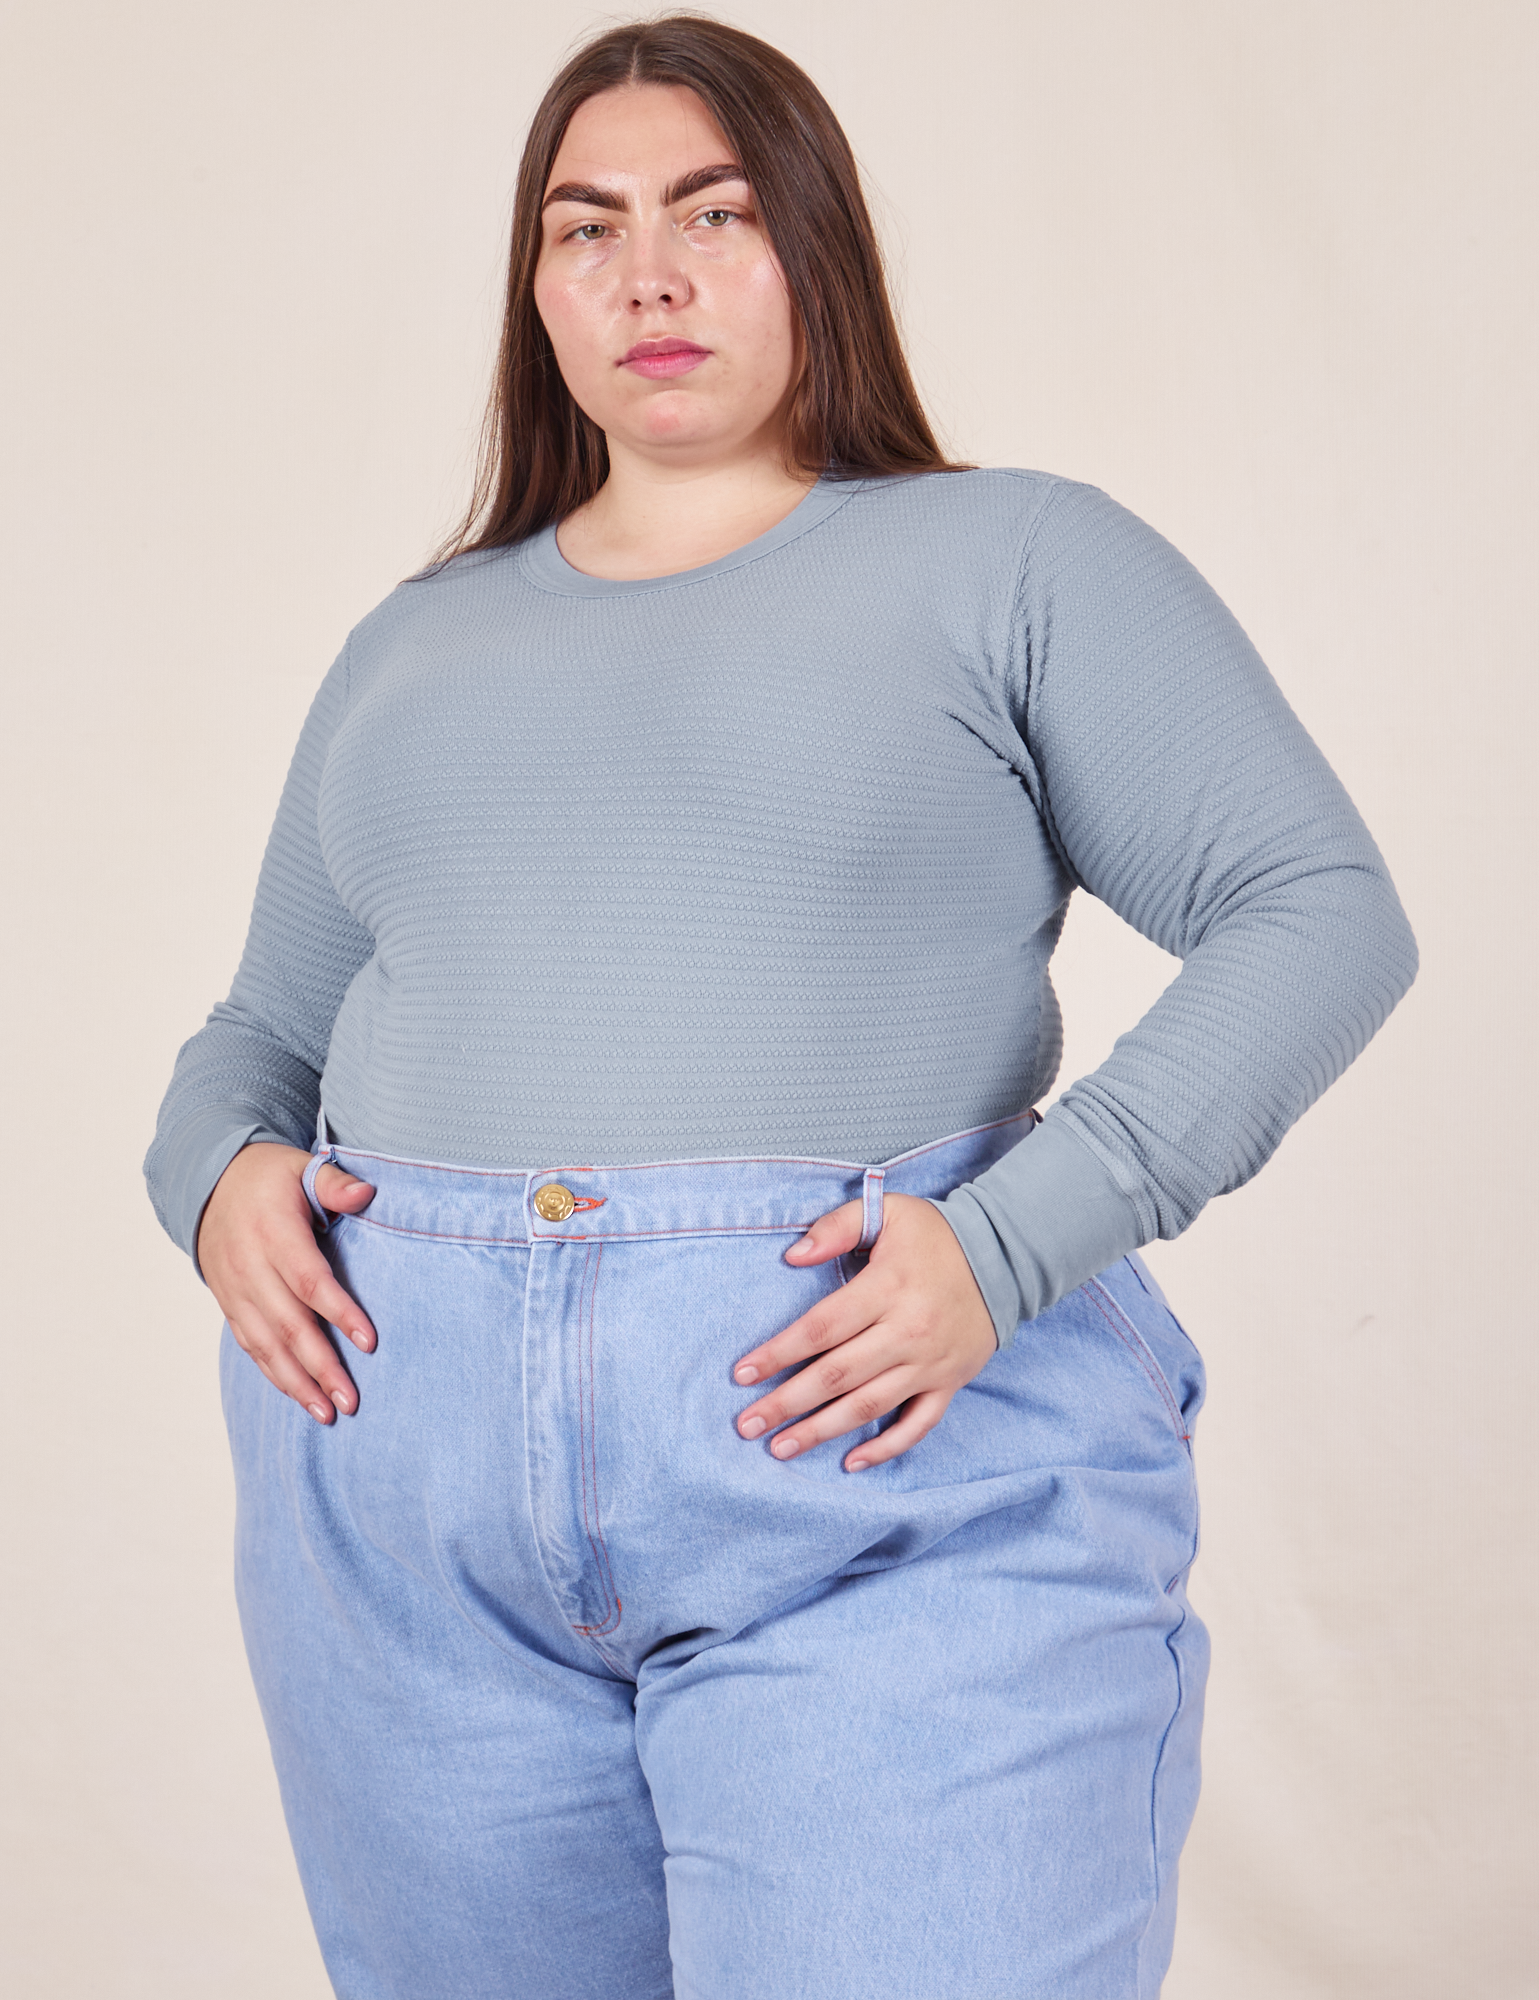 Marielena is wearing 2XL Honeycomb Thermal in Periwinkle